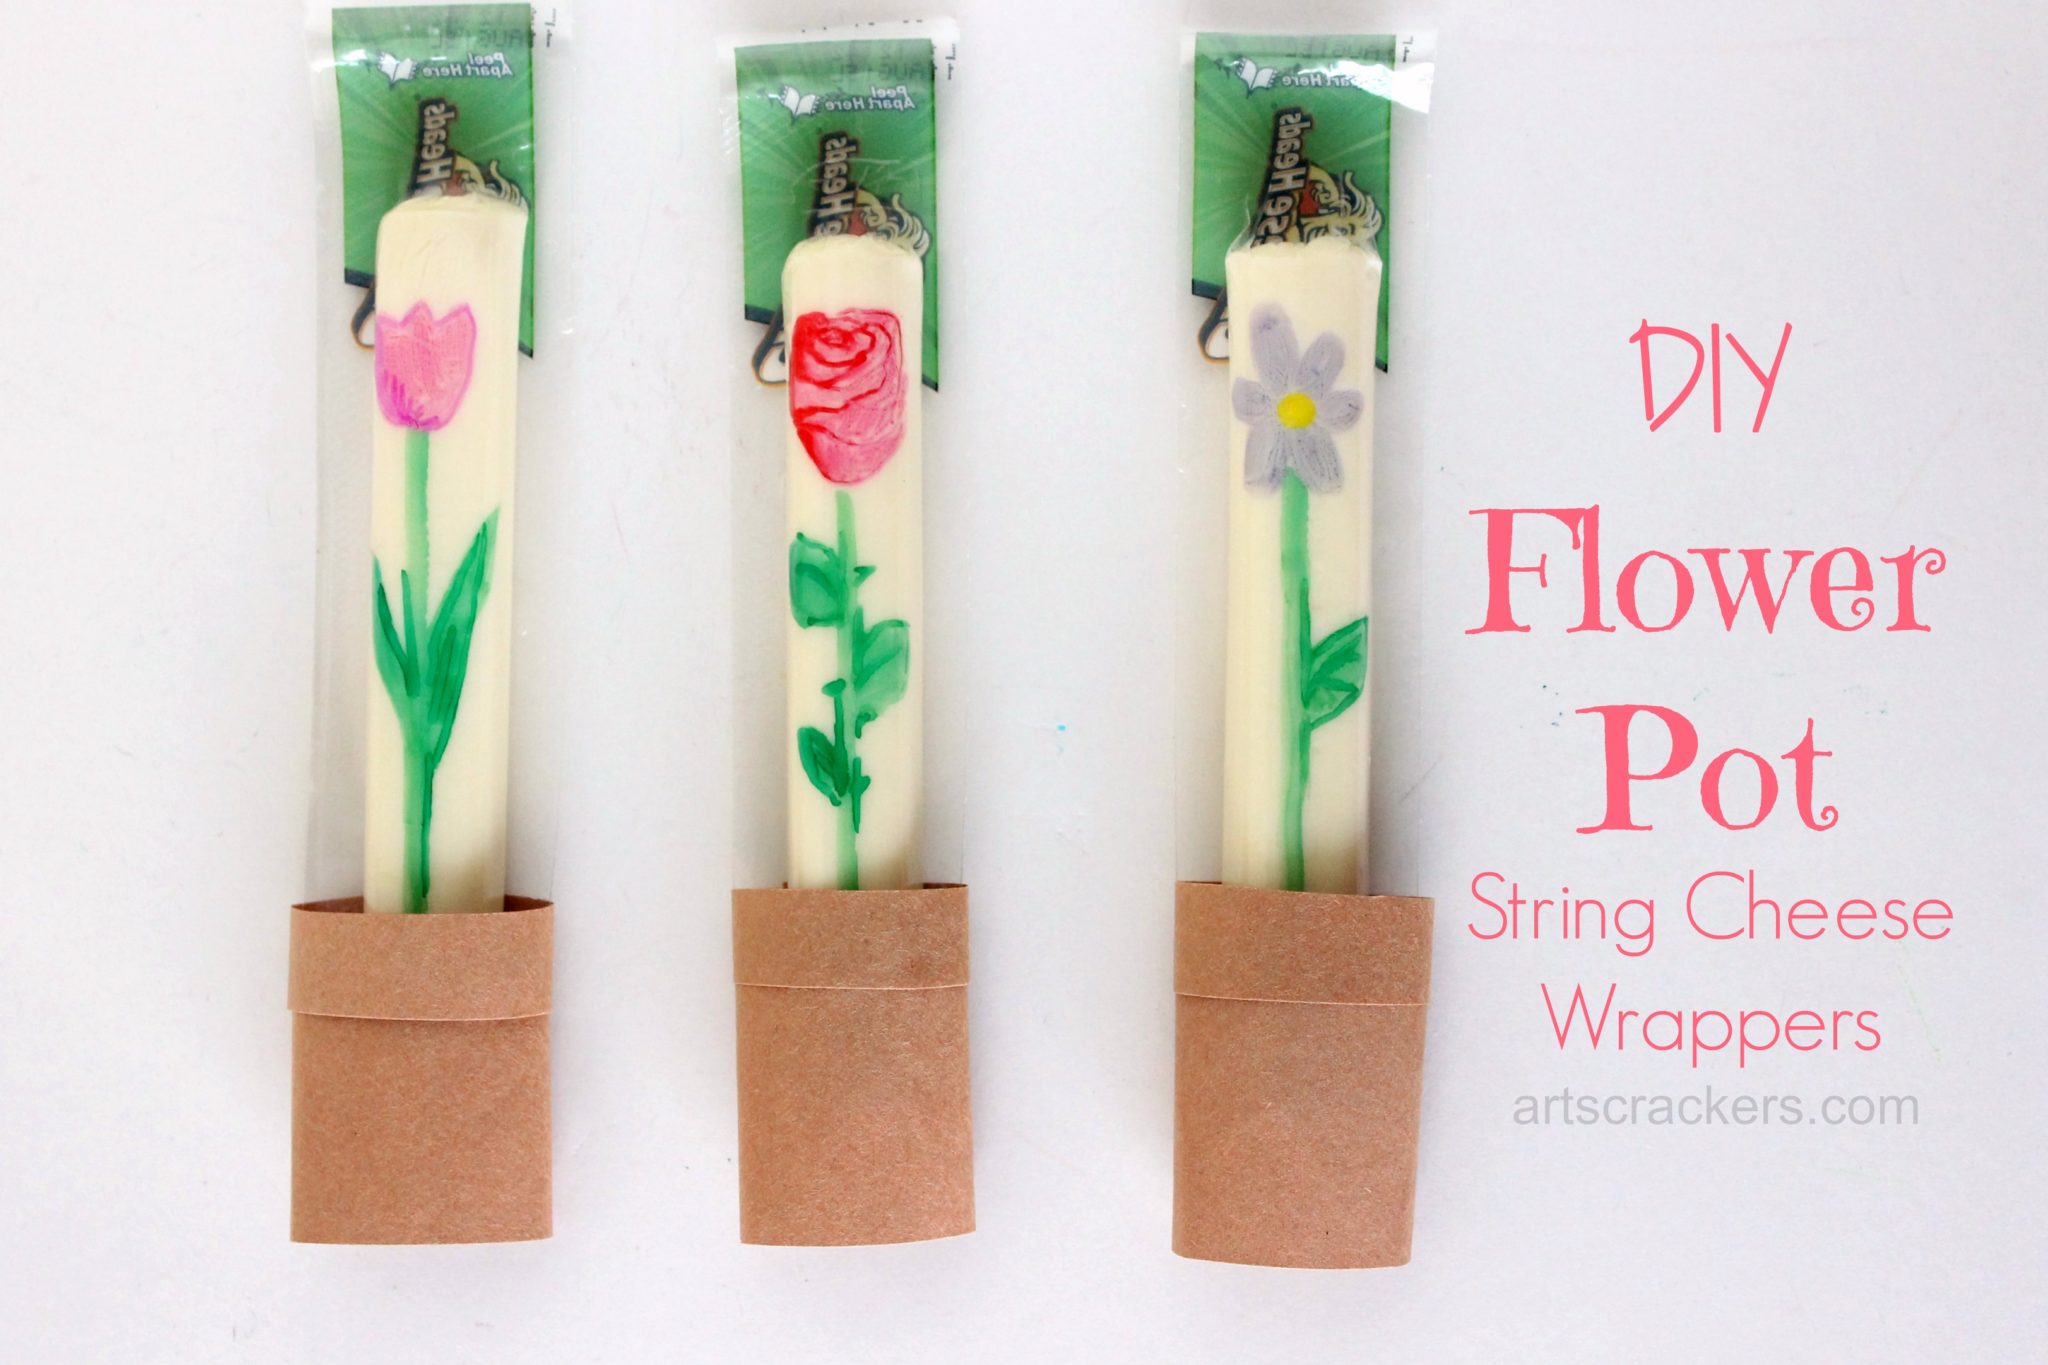 DIY Flower Pot String Cheese Wrappers